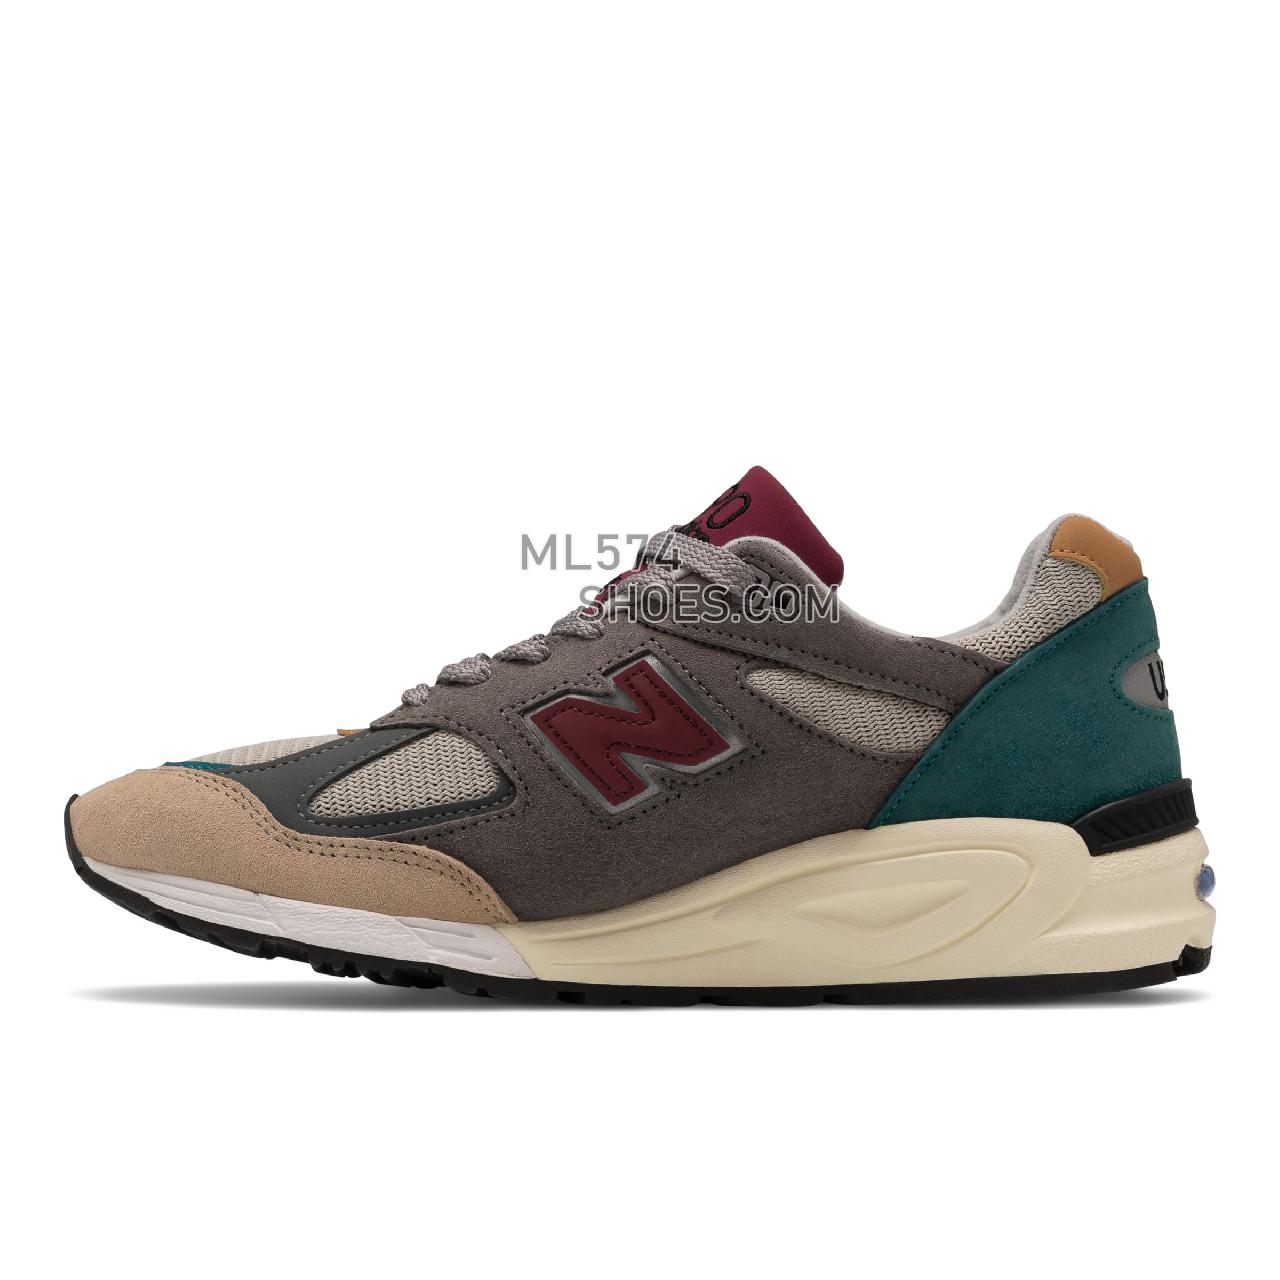 New Balance Made in USA 990v2 - Men's Made in USA And UK Sneakers - Grey with Tan - M990CP2